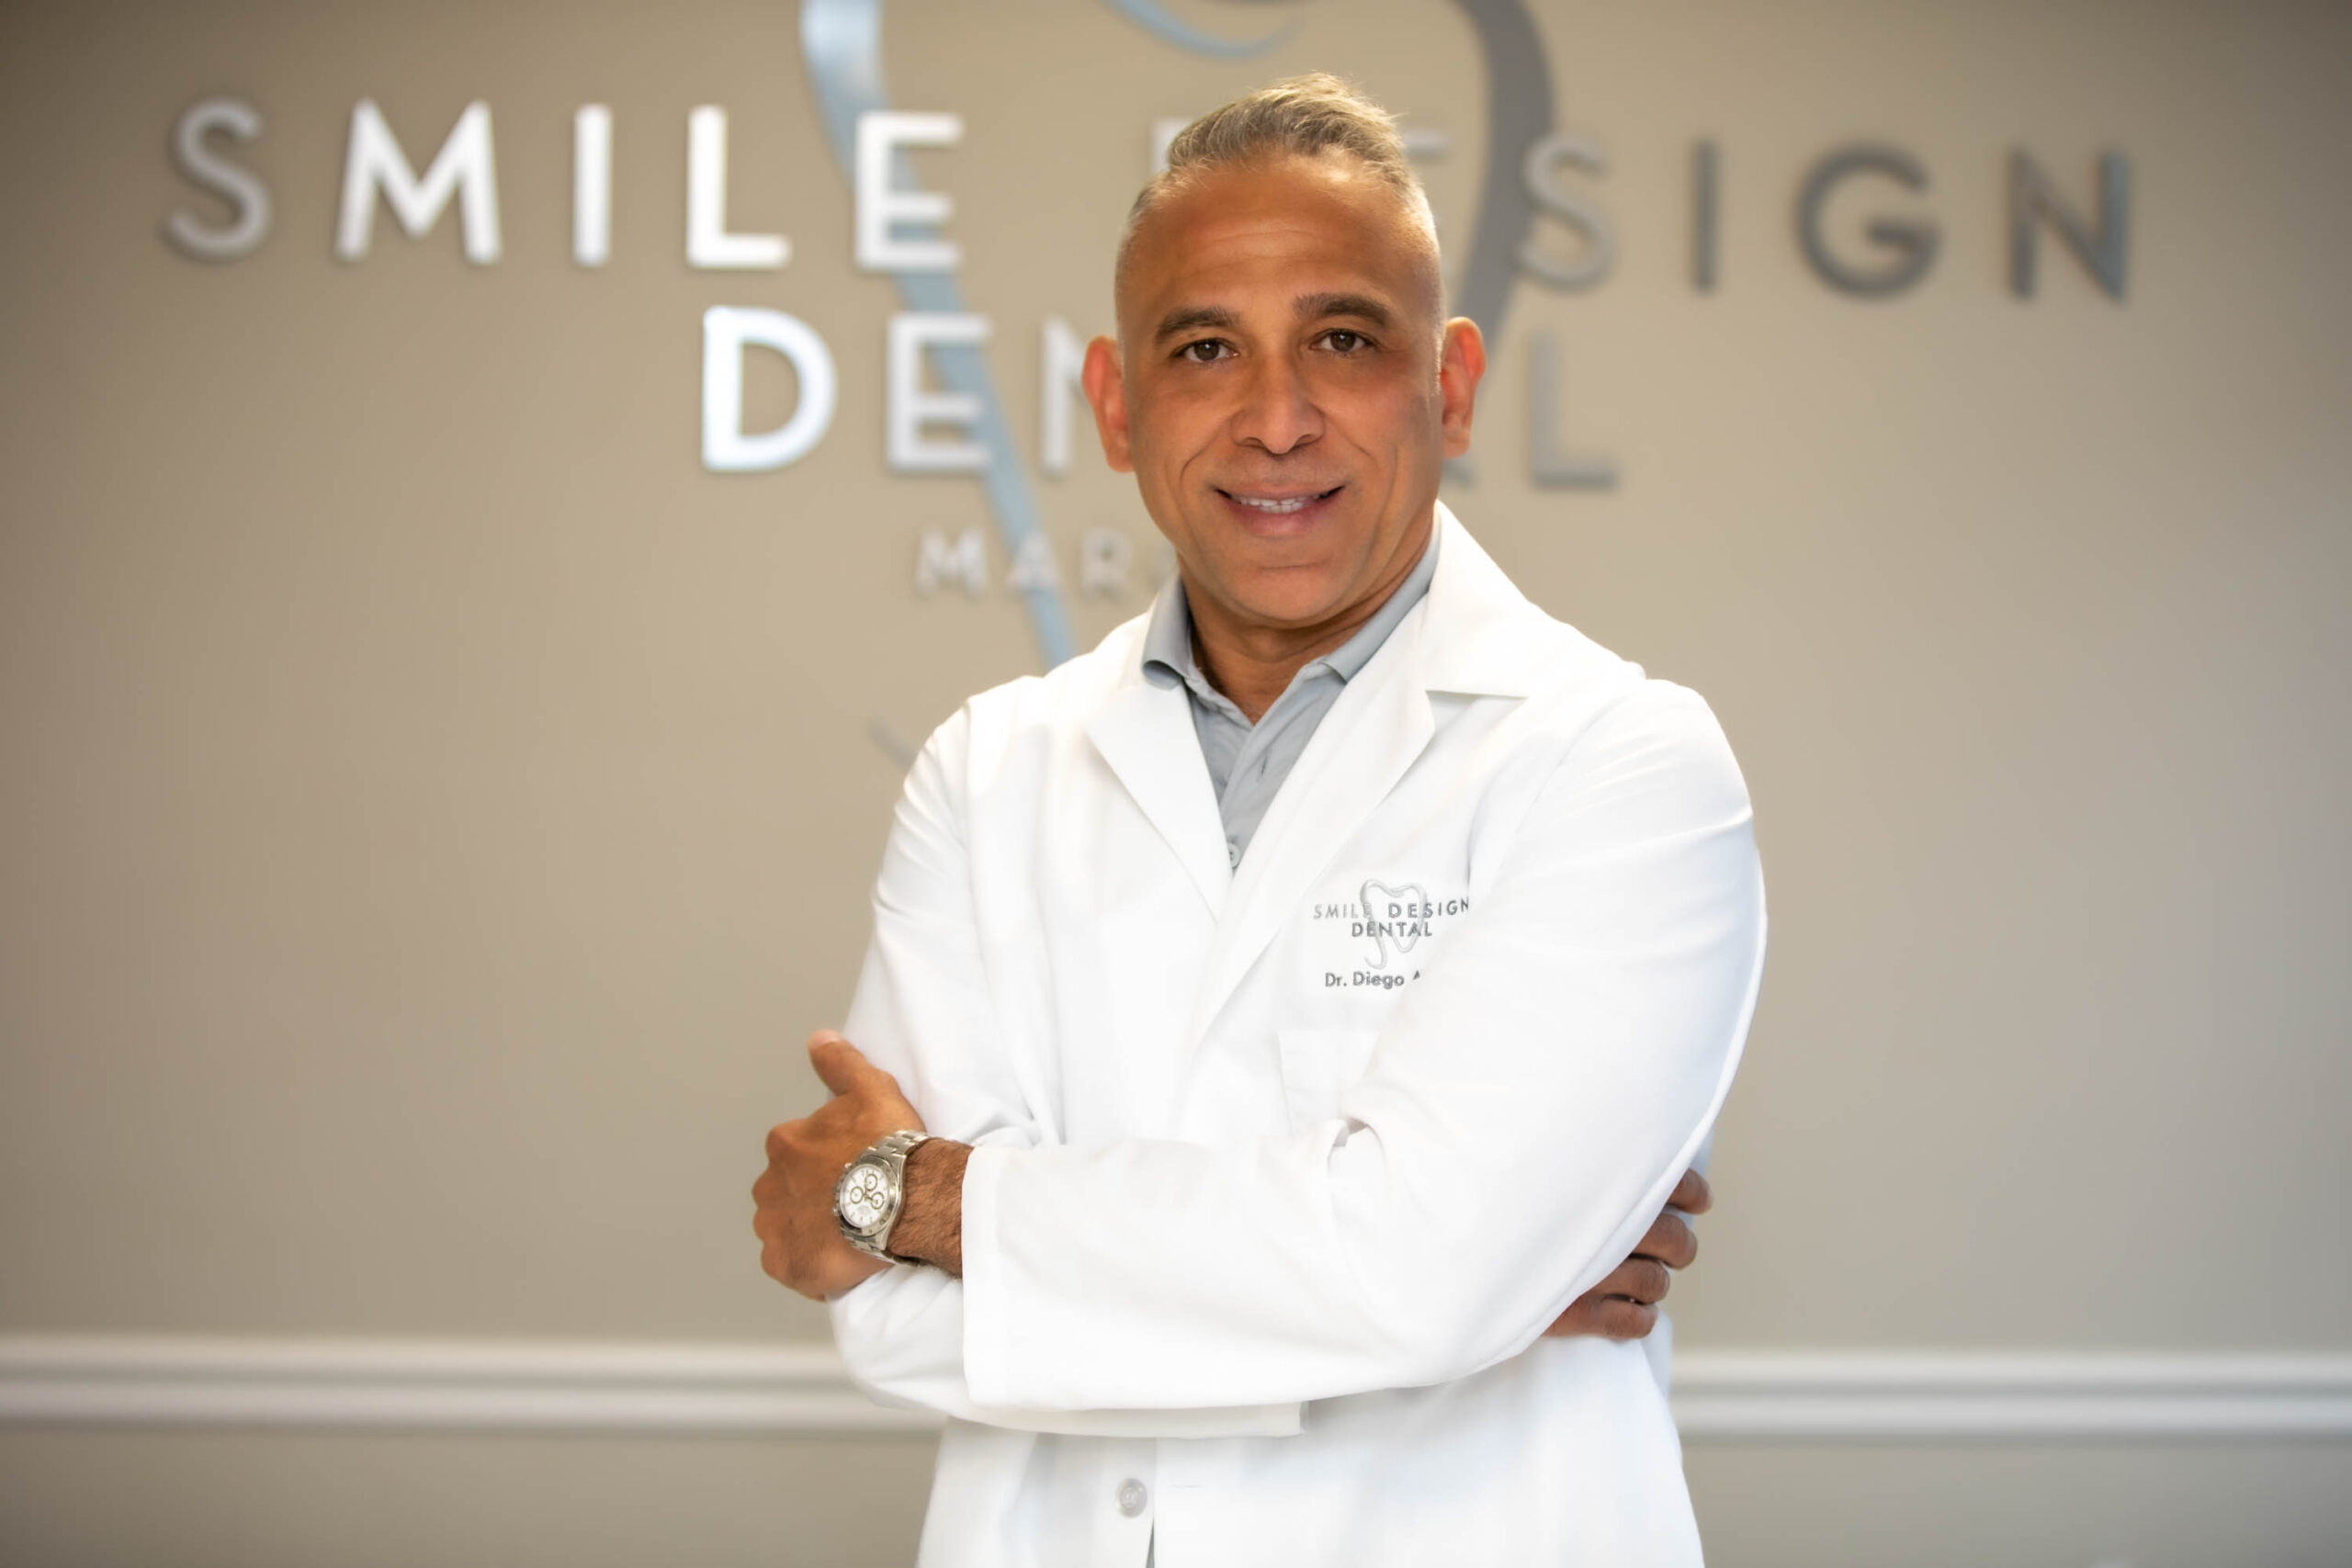 How Many Dental Implants Are Used For Full Mouth Dental Implants In Fort Lauderdale, FL?